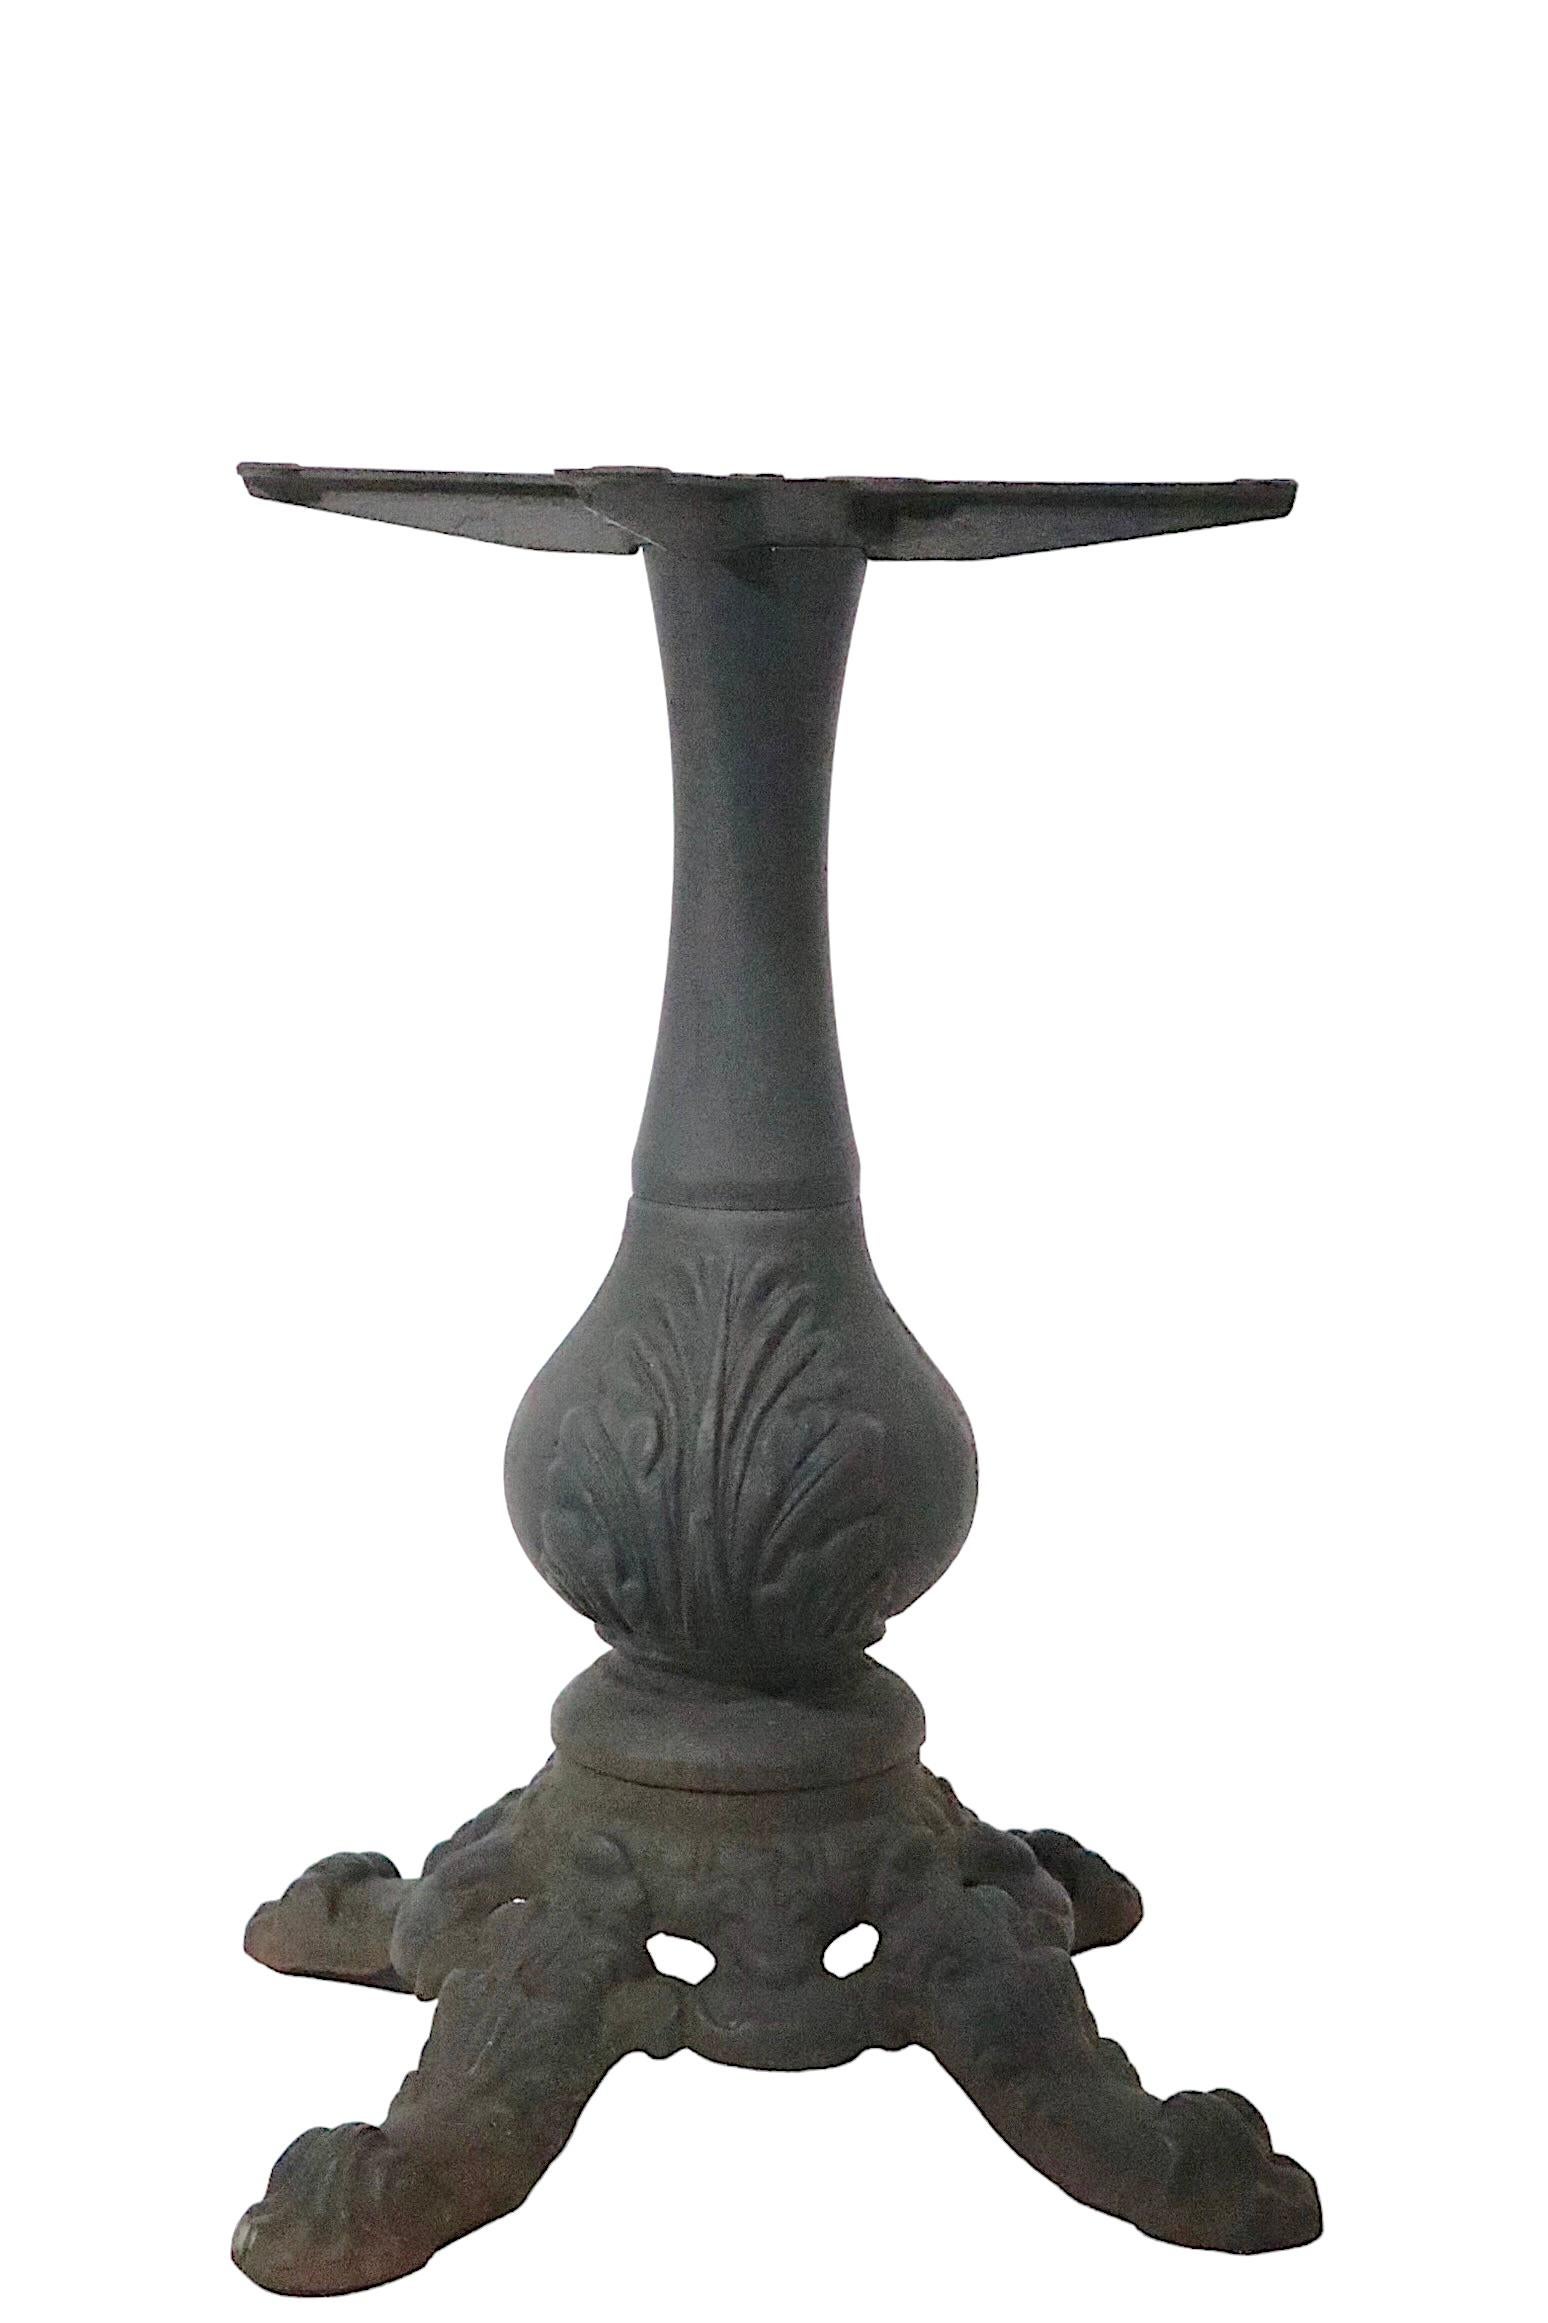 Granite Top Cast Iron Base French Style Cafe Bistro Garden Table c 1920 - 1950s For Sale 7